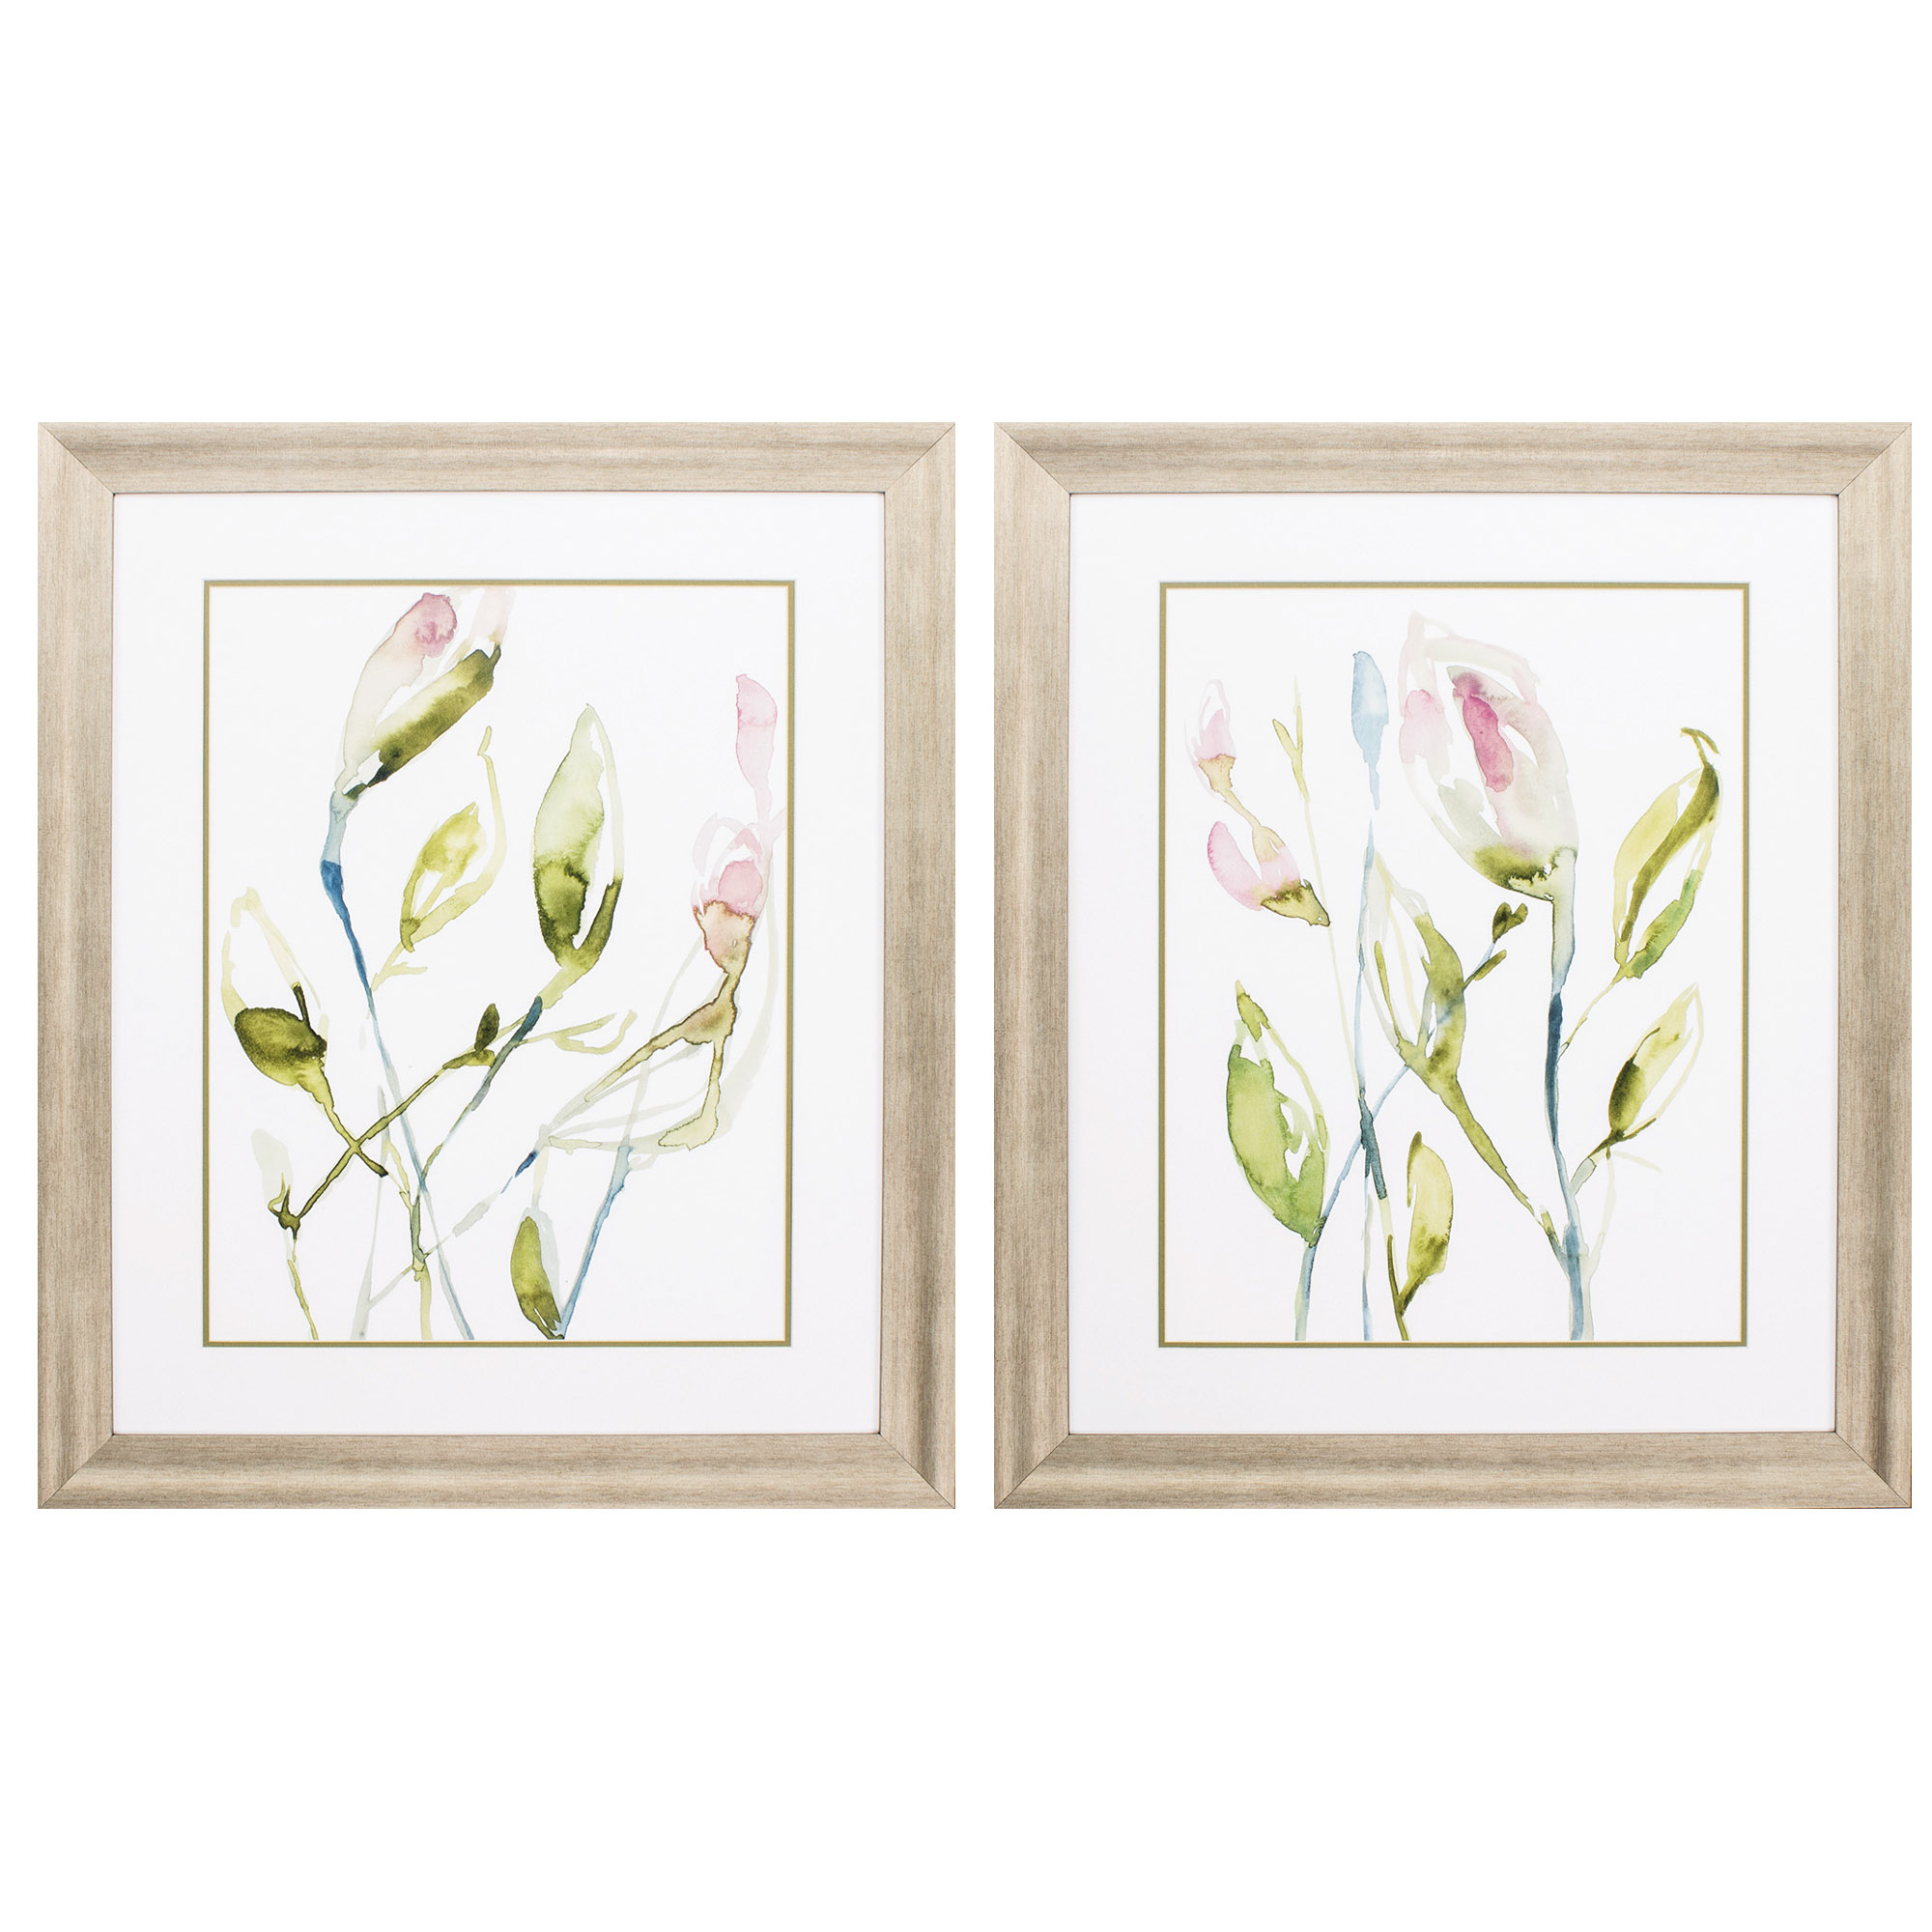 28" X 34" Champagne Color Frame Blooming Stems Set of 2